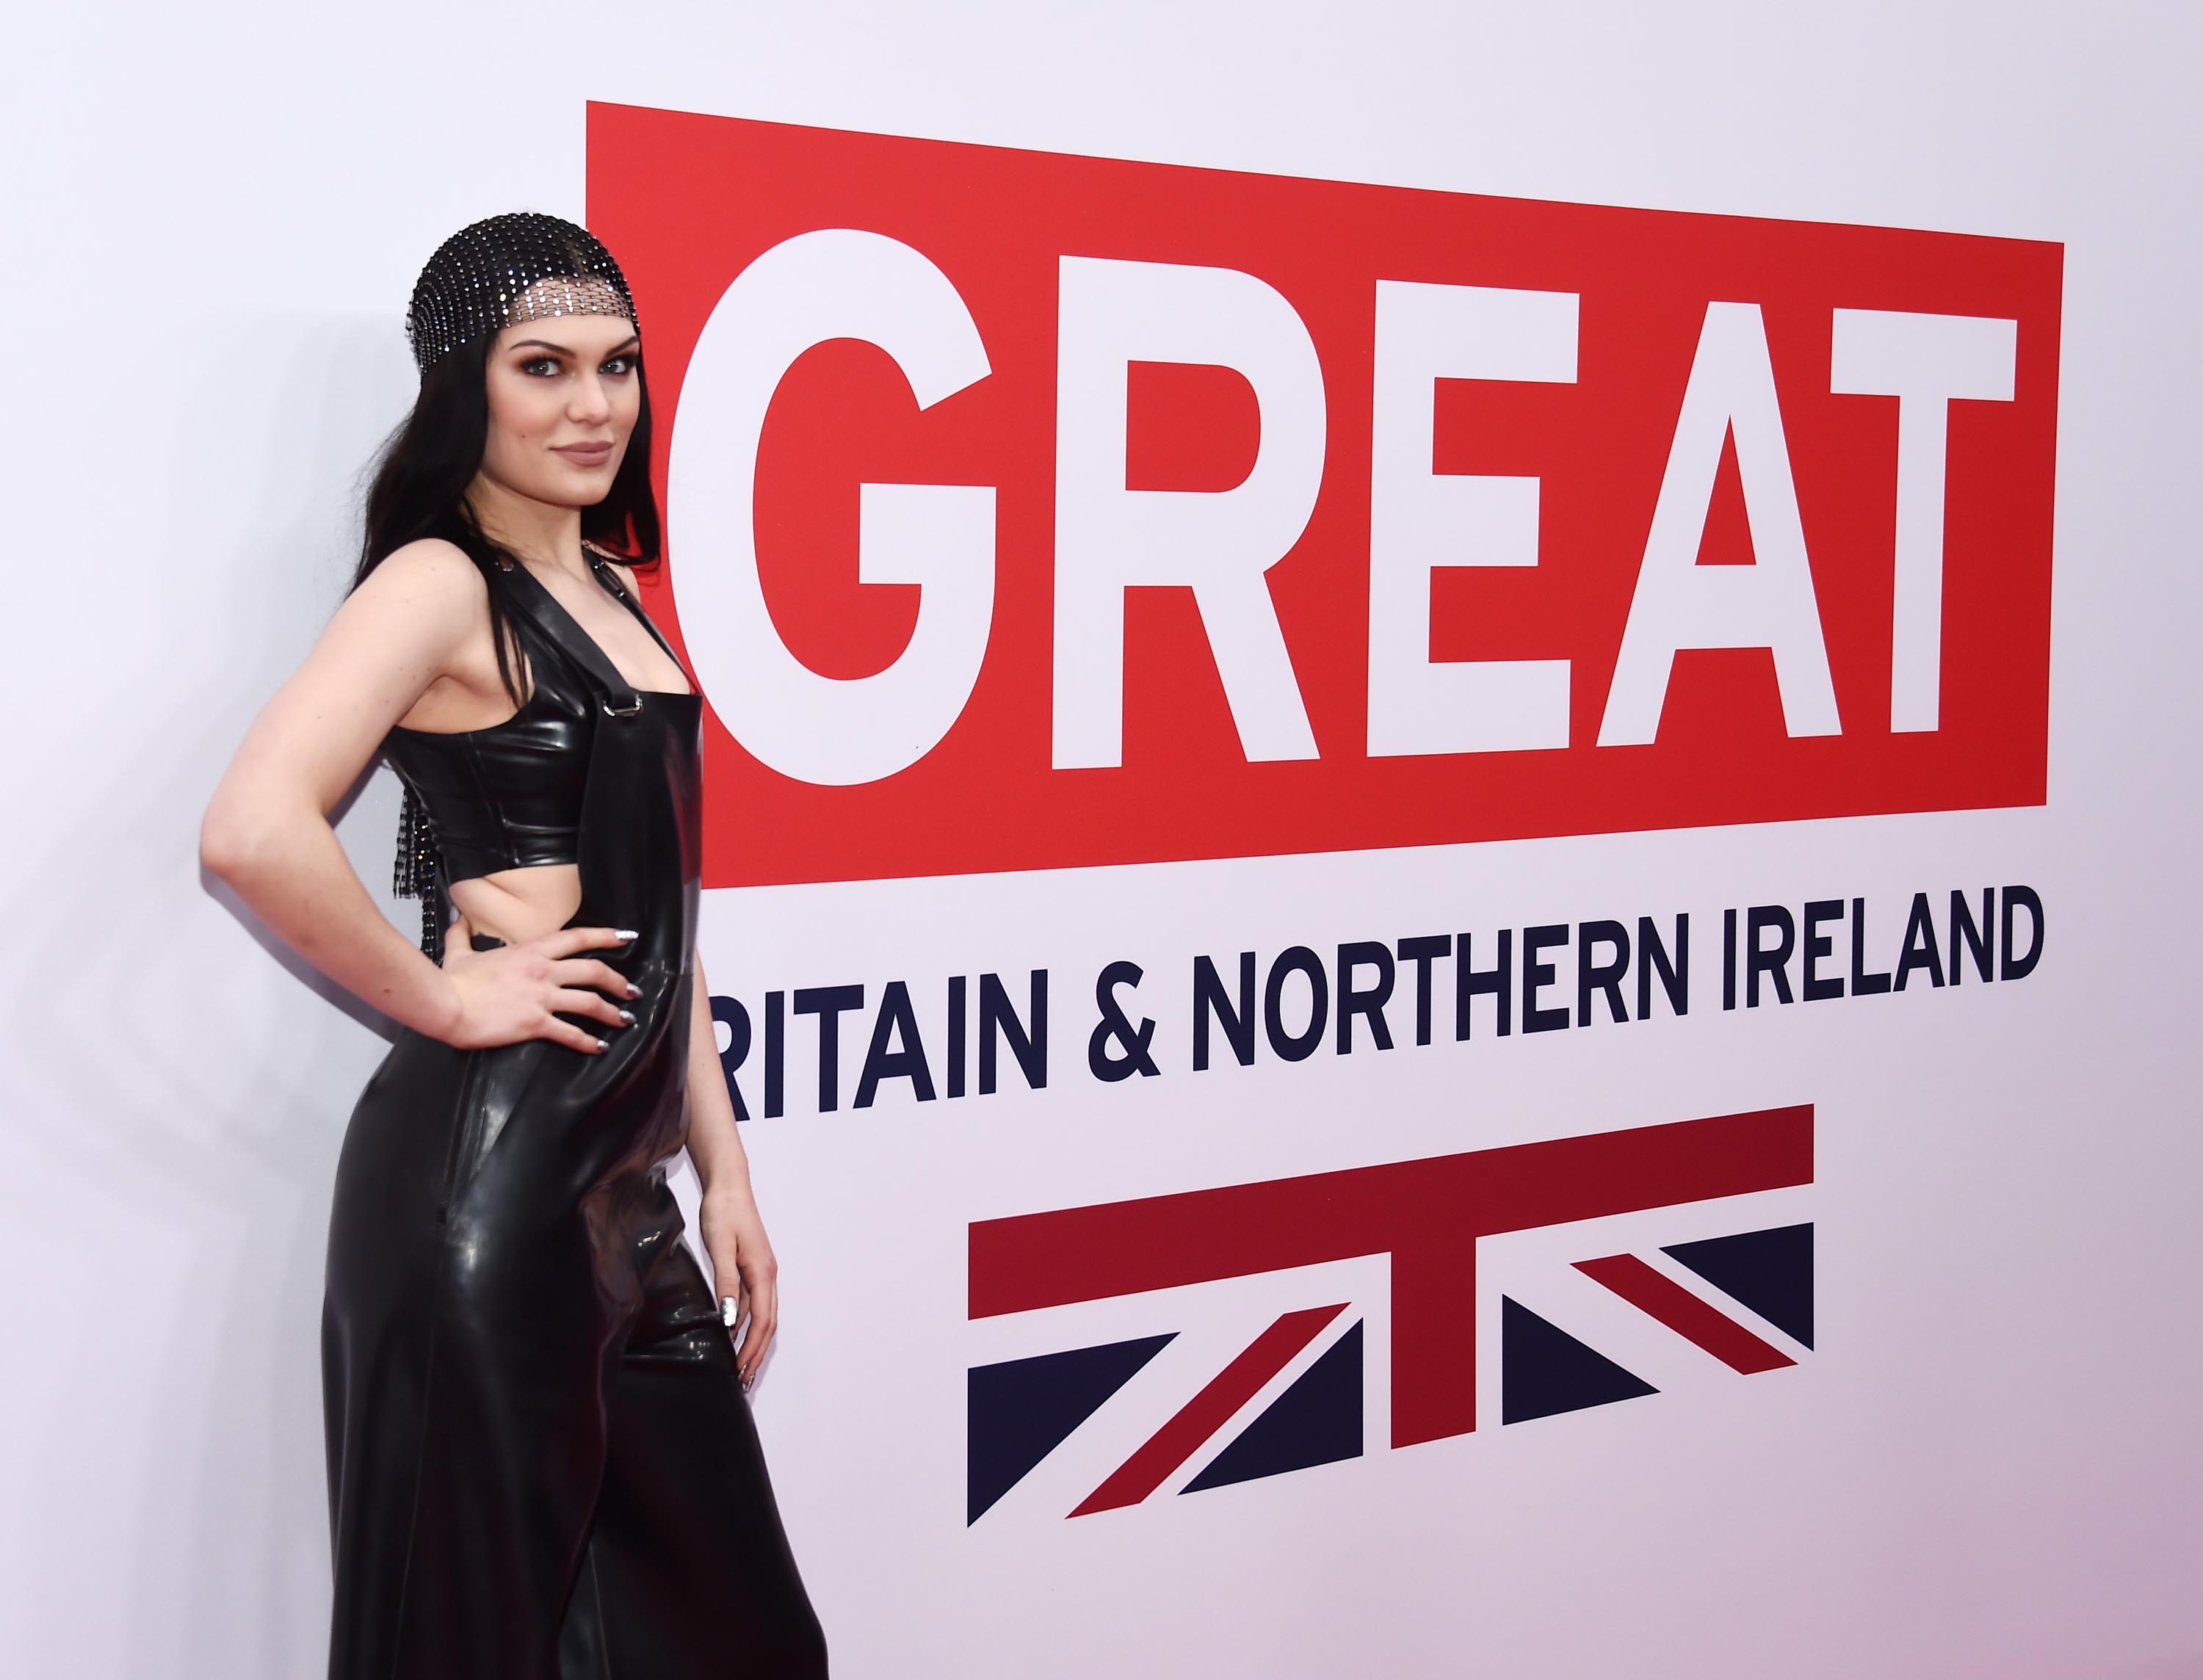 Jessie J arrives at The GREAT Film Reception to Honor the British Nominees